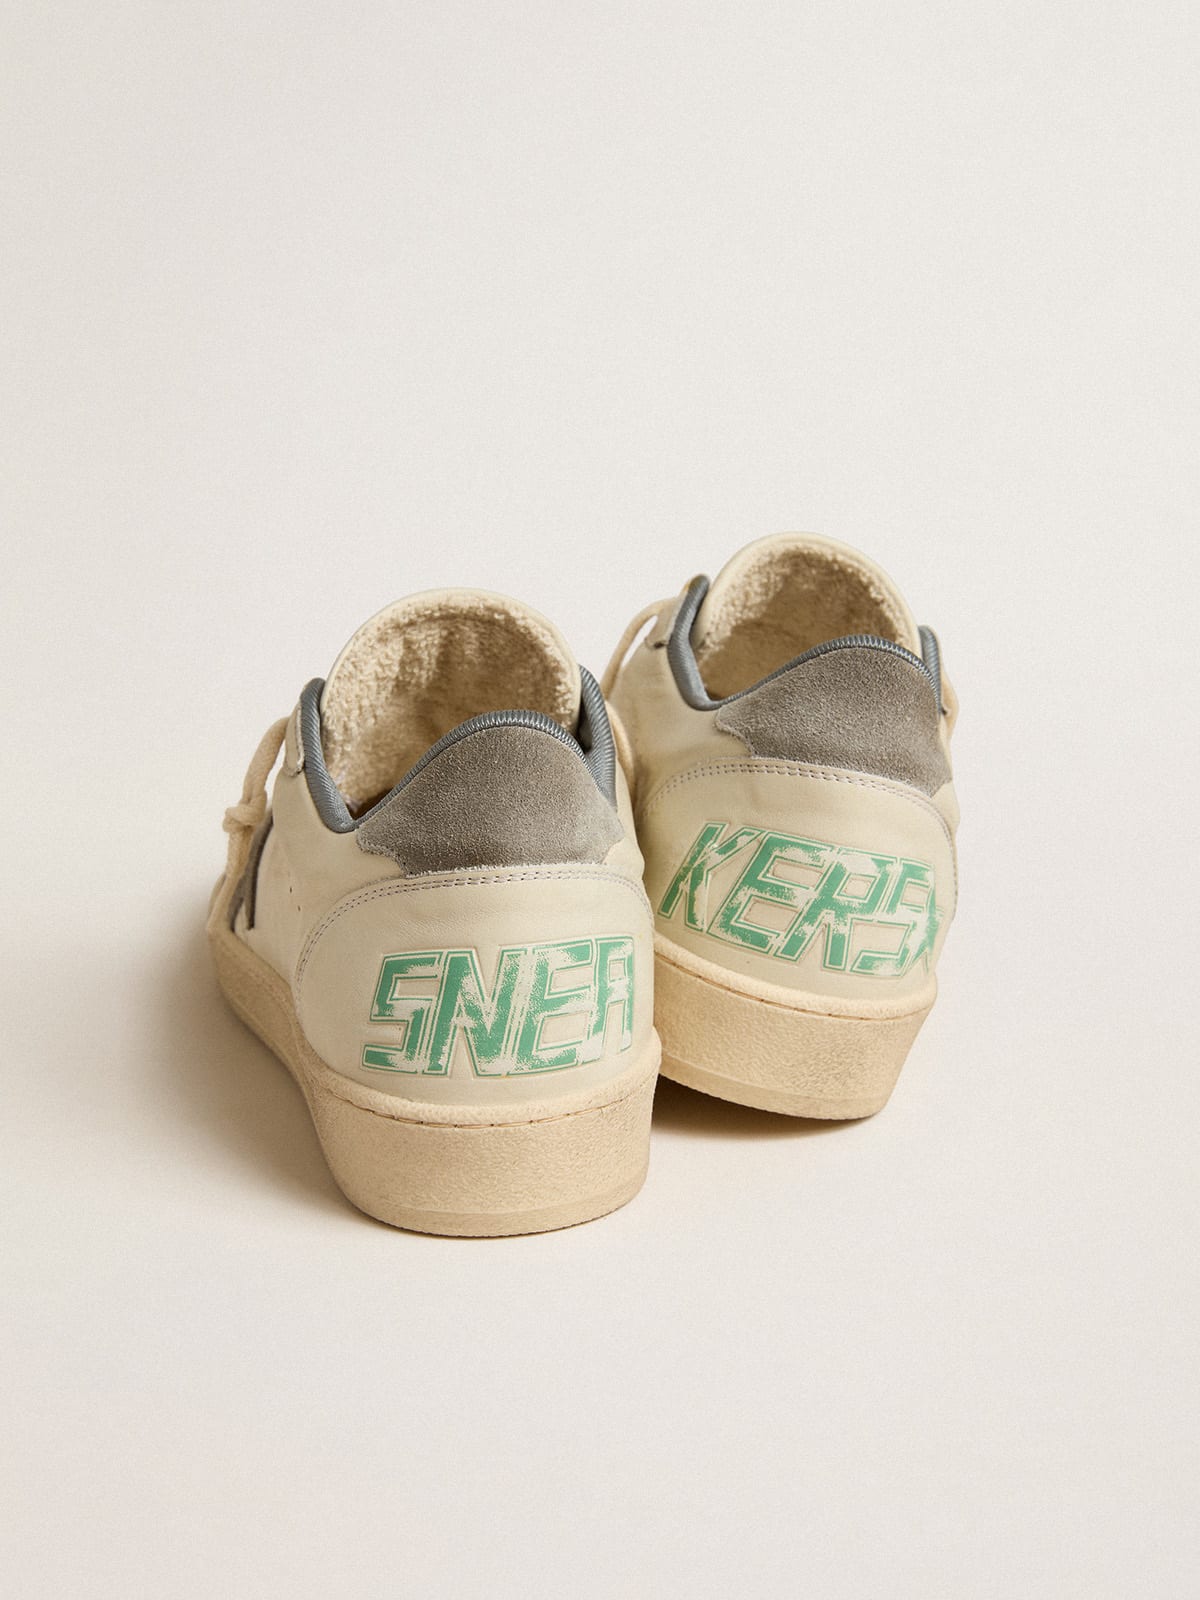 Golden Goose - Ball Star in nappa leather with gray suede star and heel tab in 